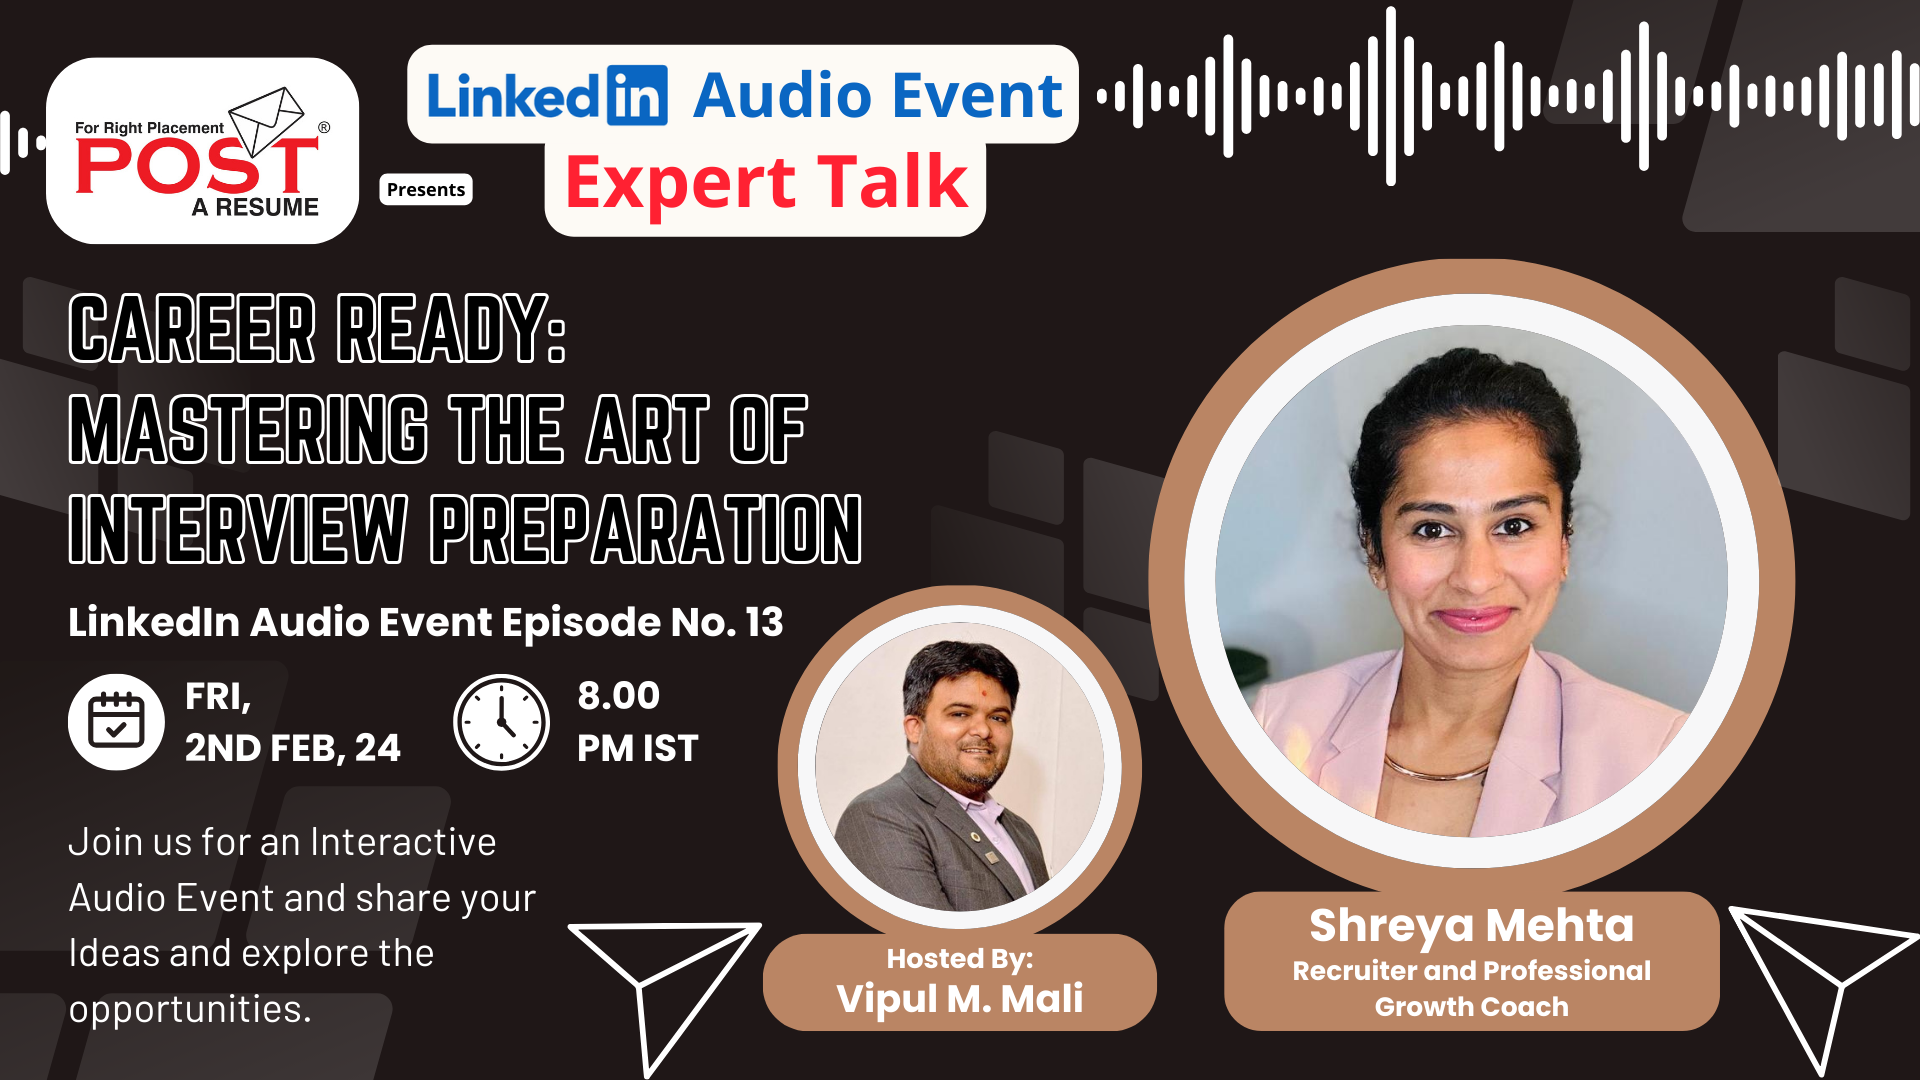 Expert Talk with Shreya Mehta on Career Ready: Mastering the Art of Interview Preparation